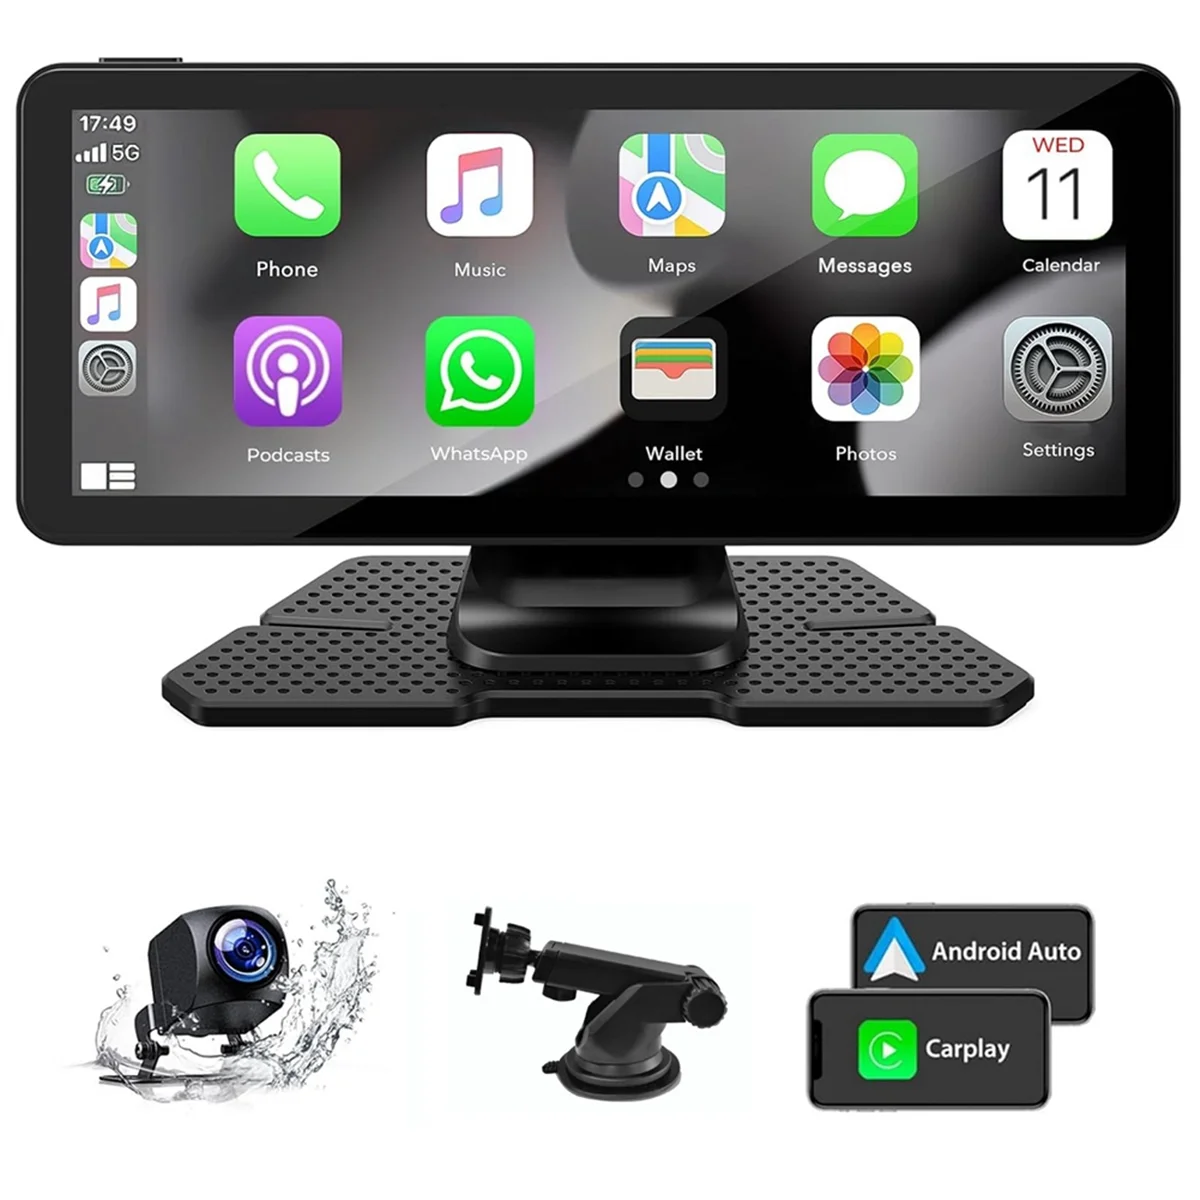 

Wireless Carplay Car Stereo Portable 6.86In Touch Screen Android Auto Backup Camera Navigation Mirror Link/FM/Bluetooth